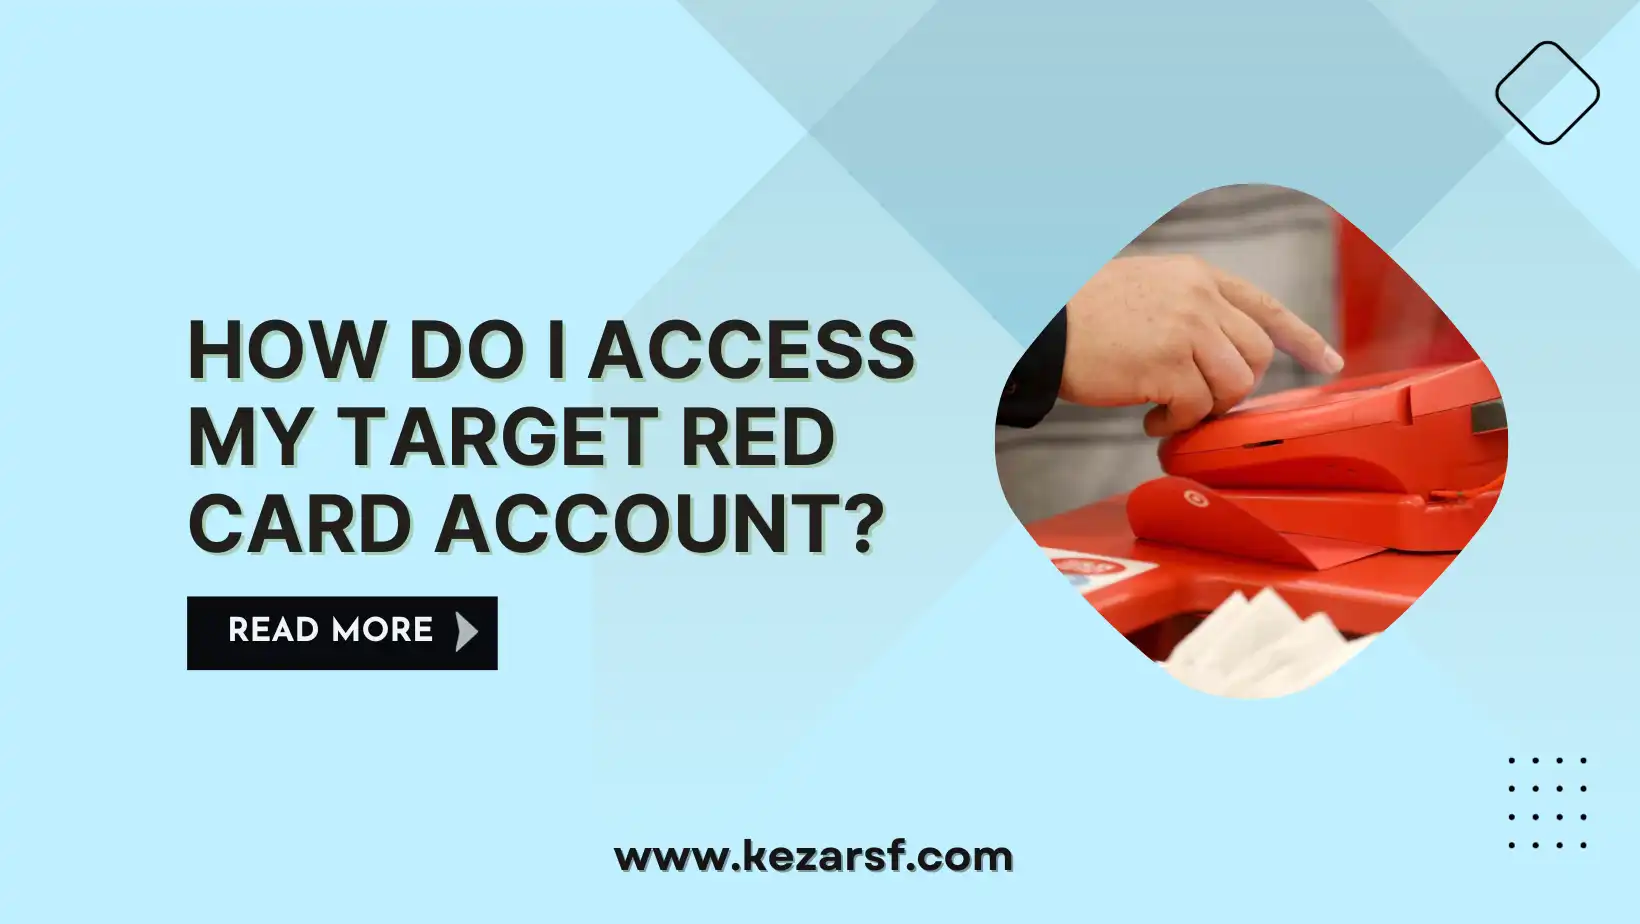 How Do I Access My Target Red Card Account?